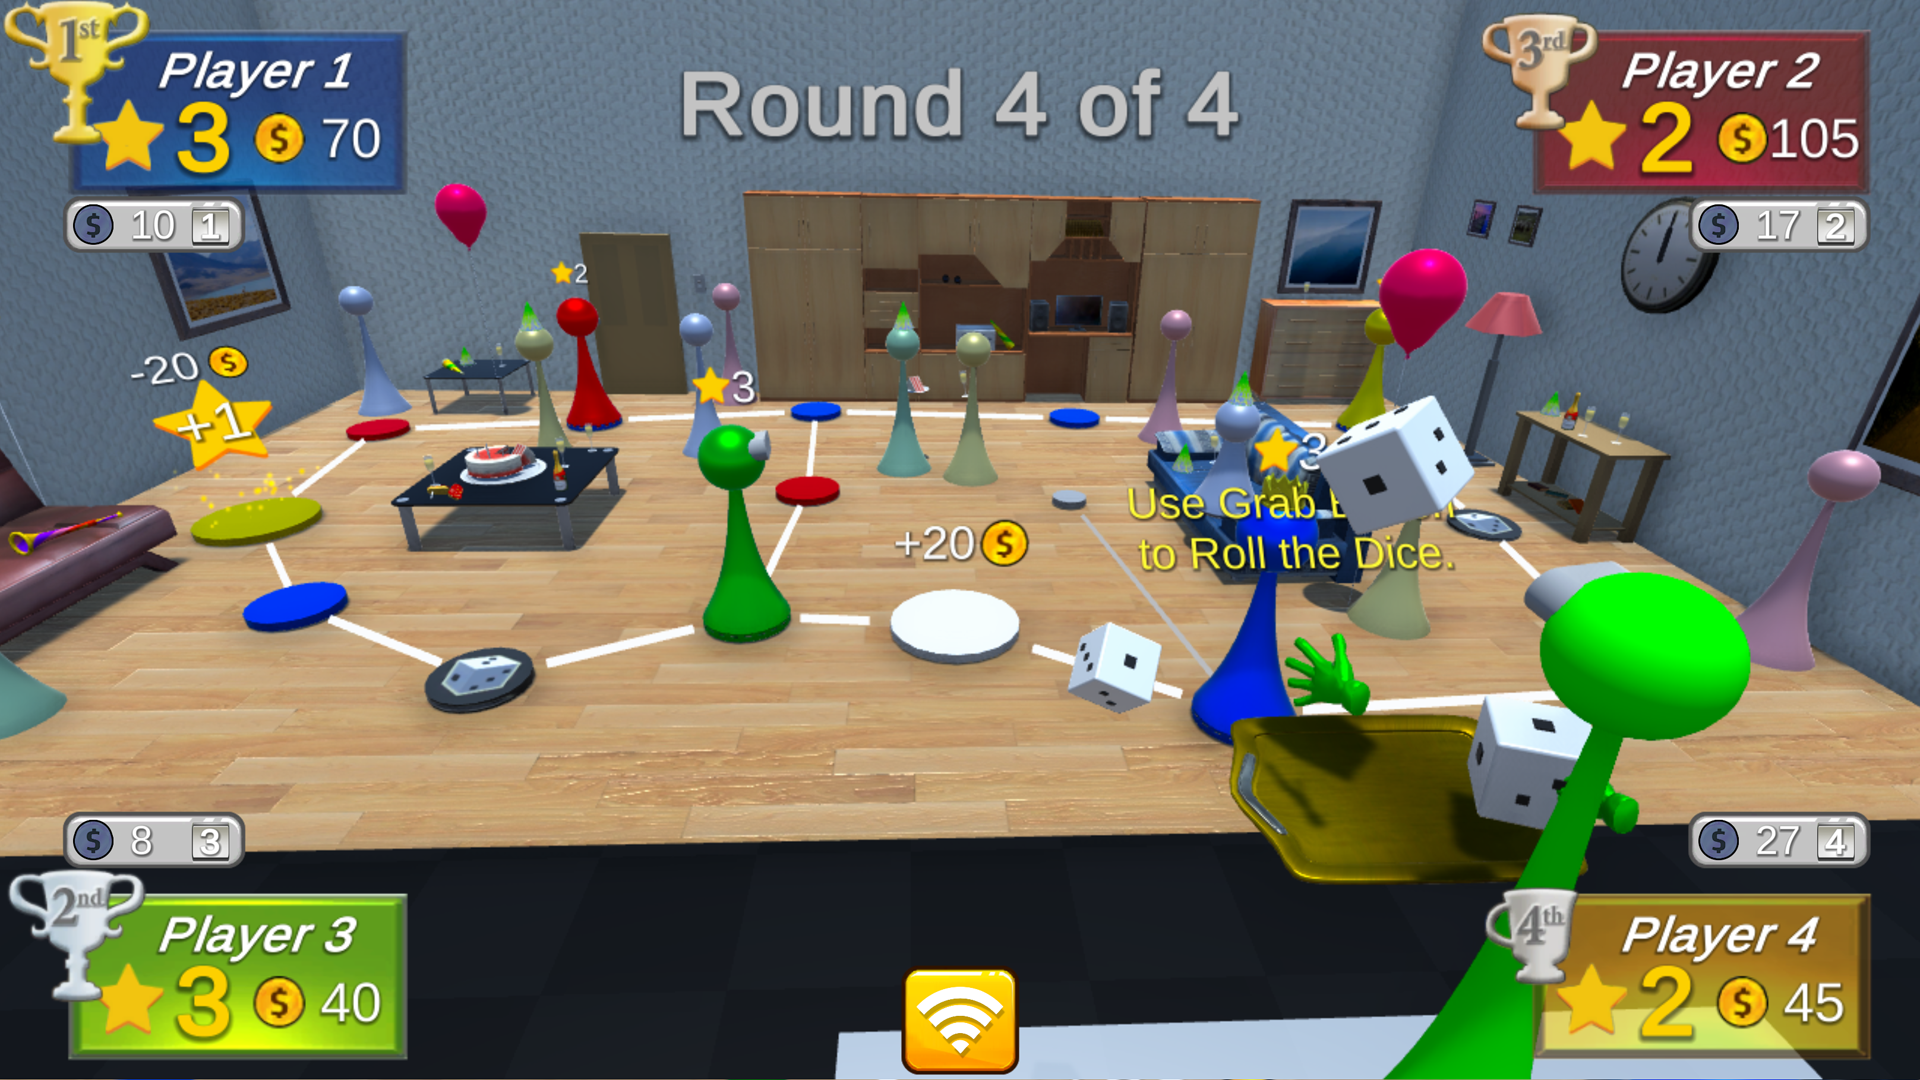 Rolling the dice in VR Party Club